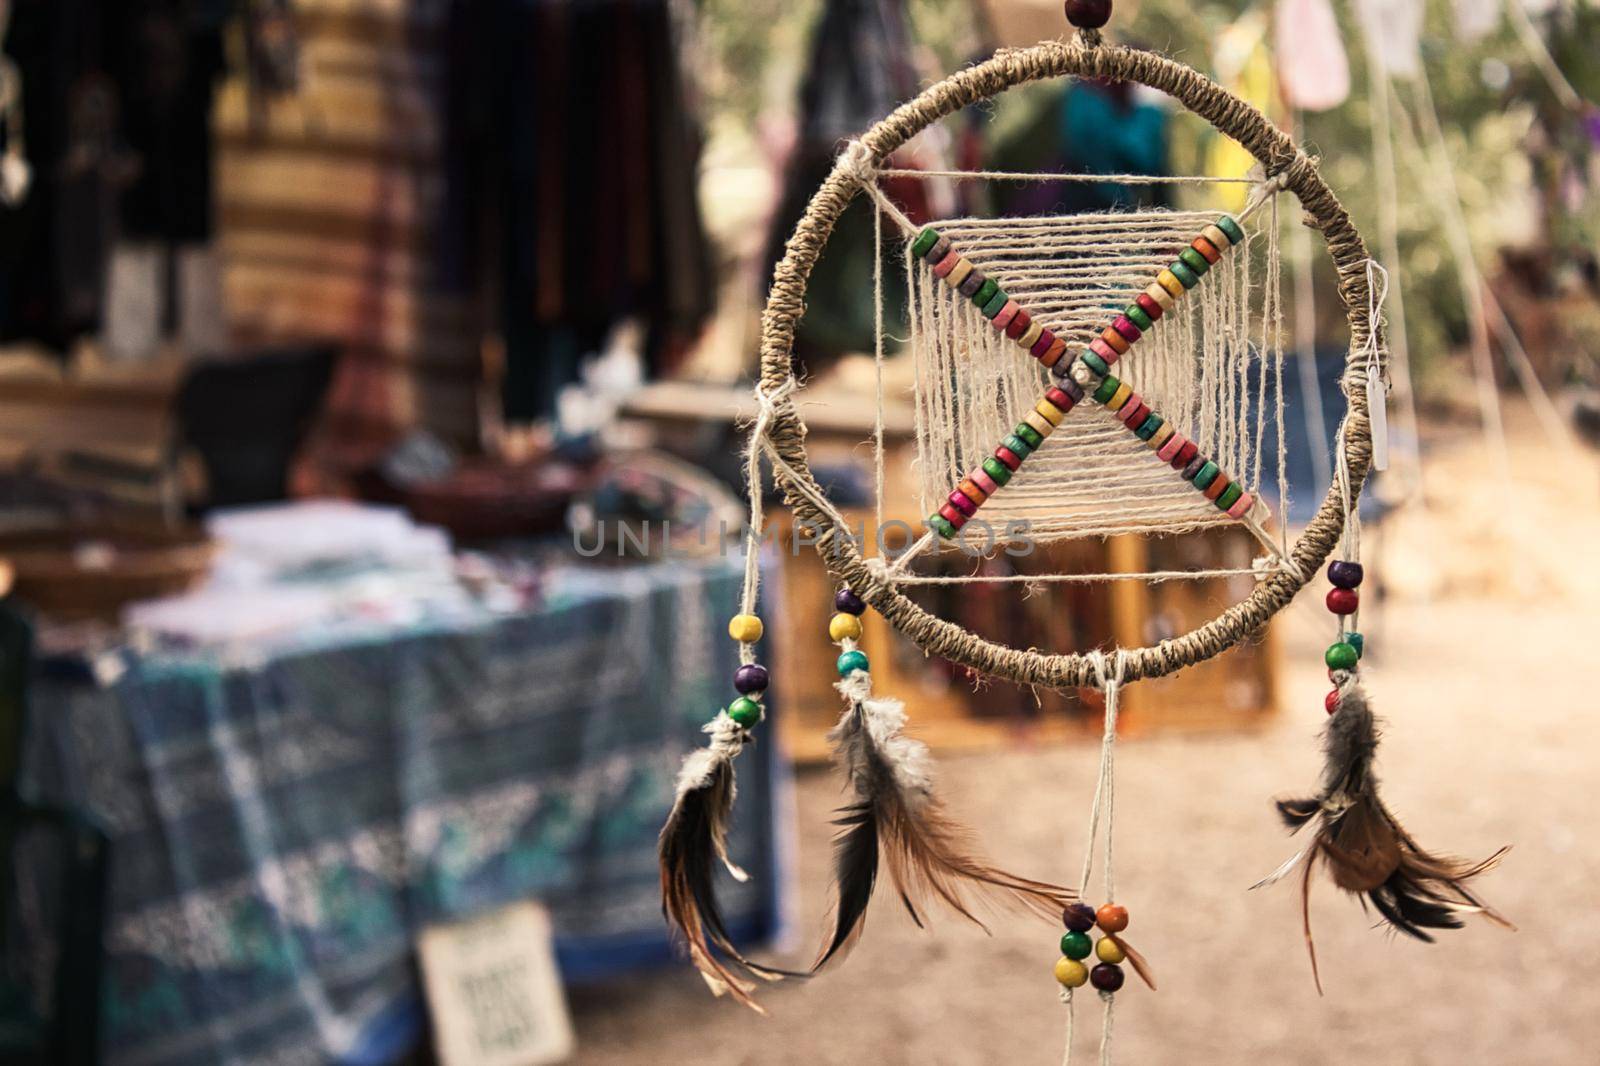 Dream catcher hanging from a tree at a bohemian festival artisan market